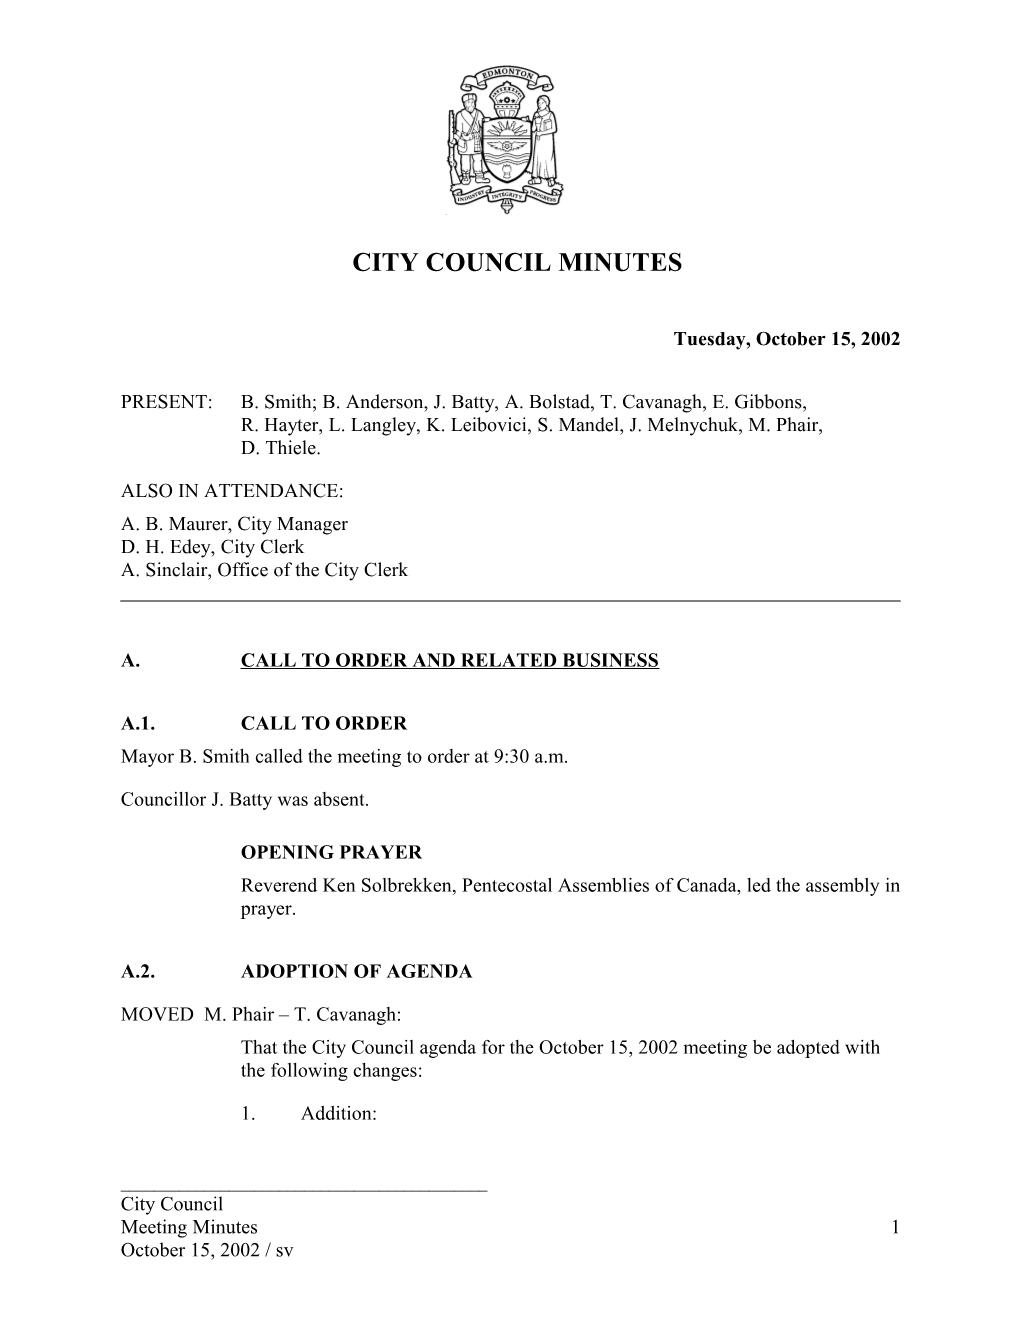 Minutes for City Council October 15, 2002 Meeting